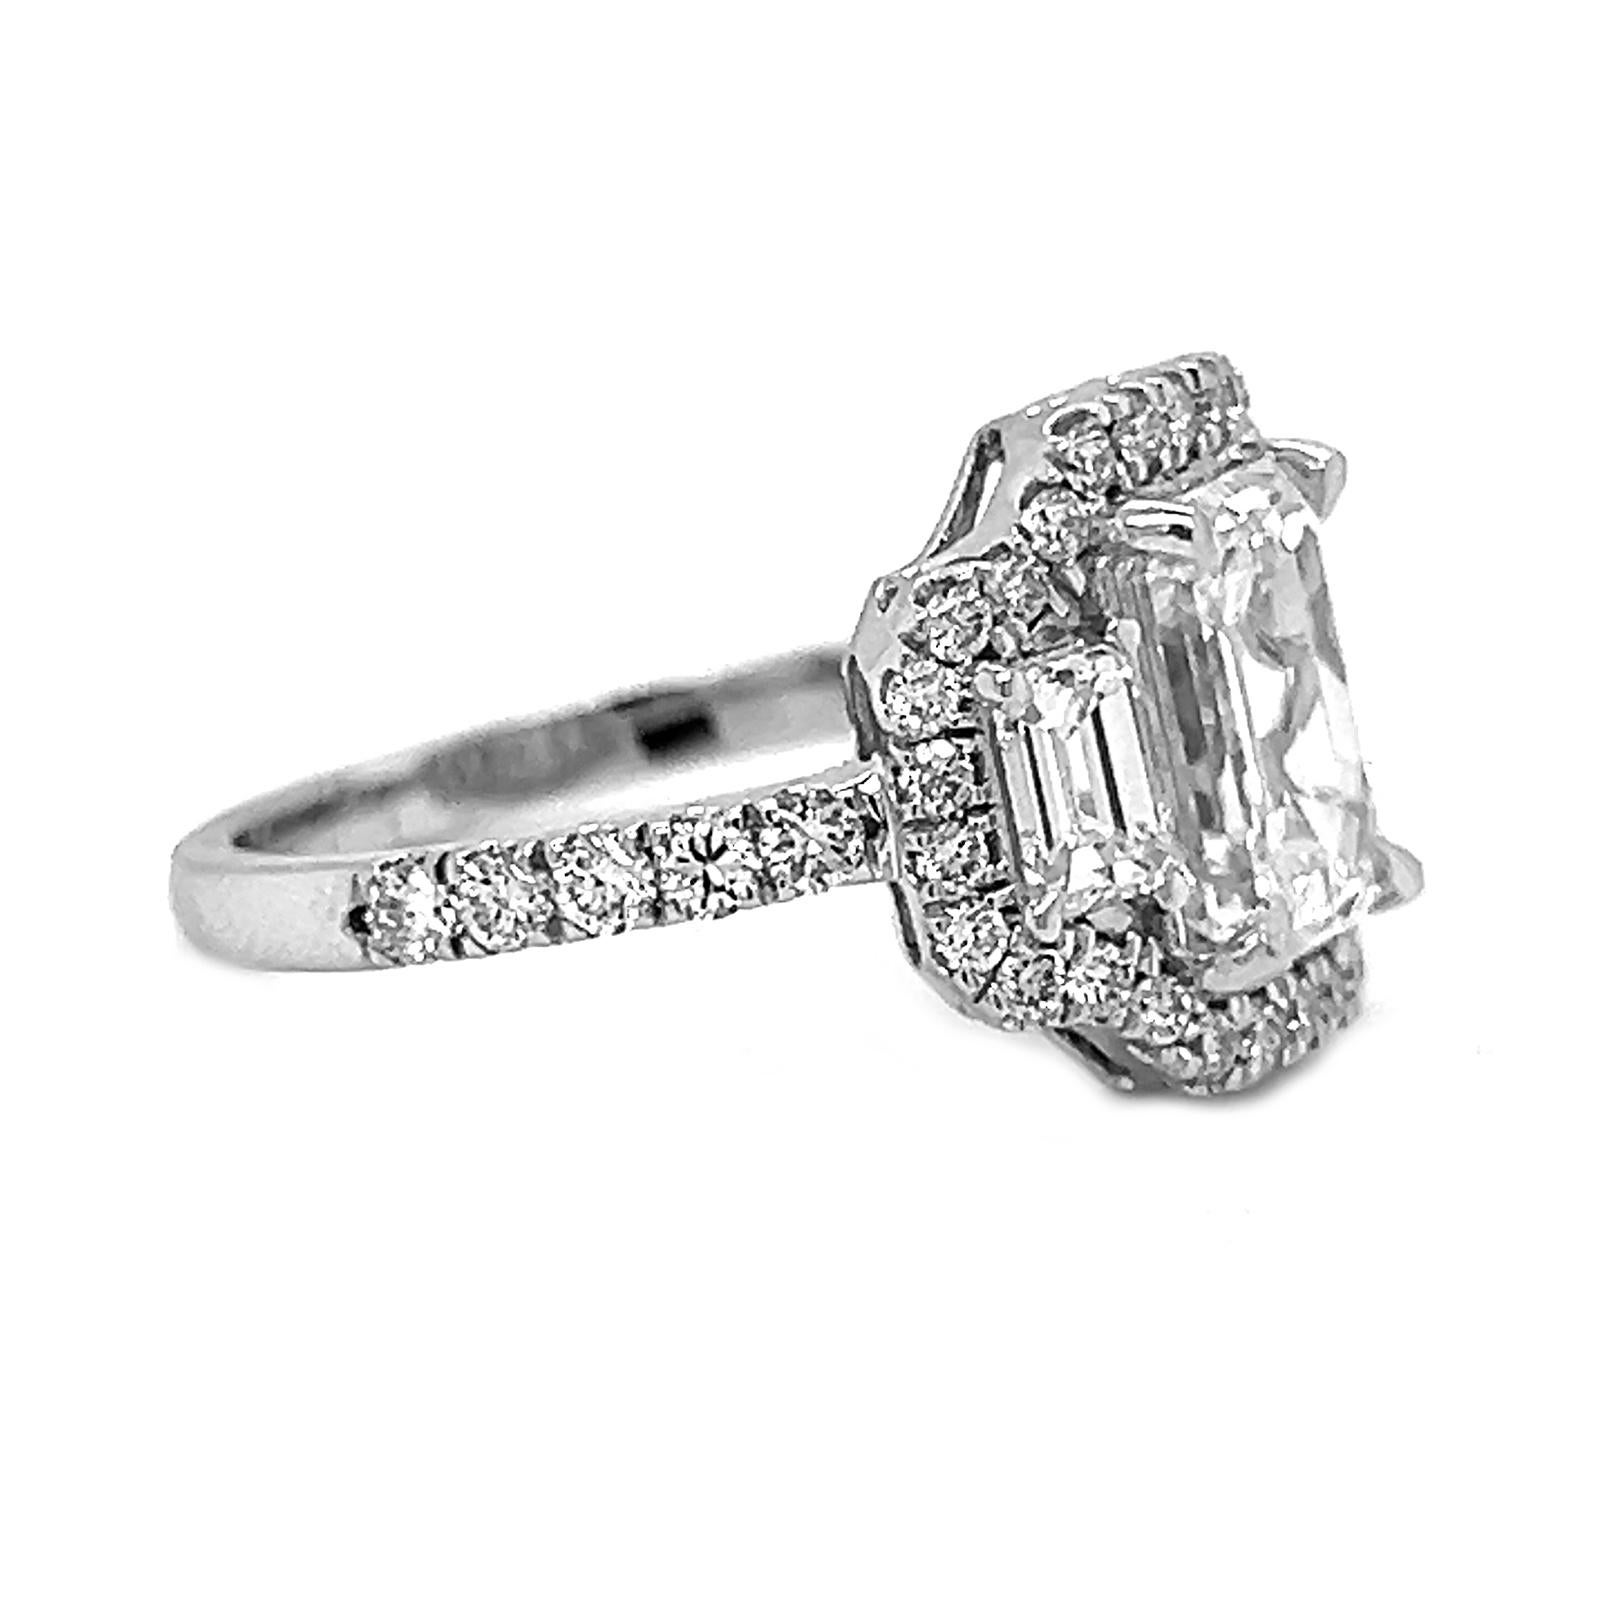 Emerald Cut 3.25 Carat T.W. Natural Mined 3 Stone Art Deco GIA Certified Diamond 14KT Ring For Sale